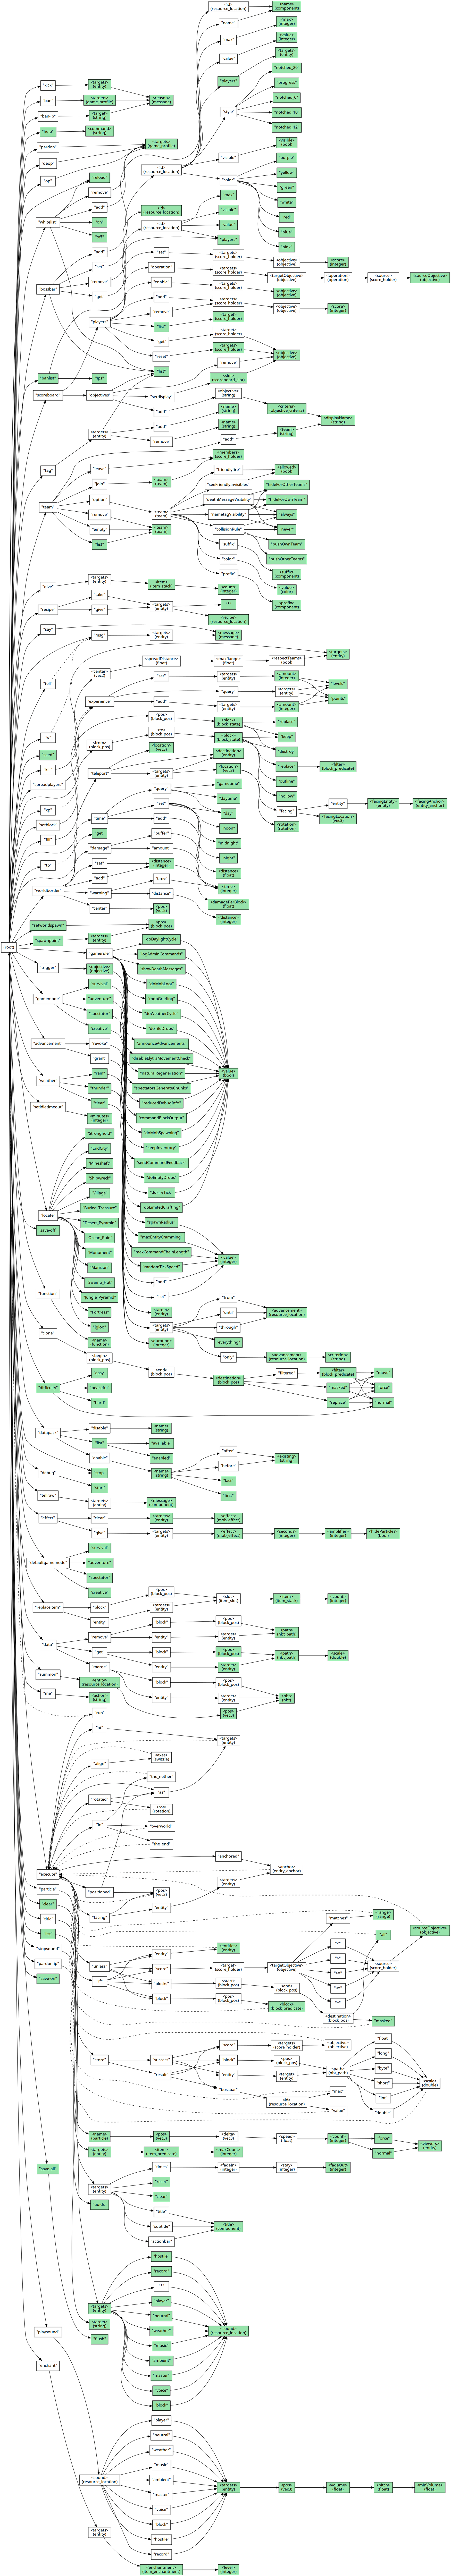 Command graph 18w22c optimized.png